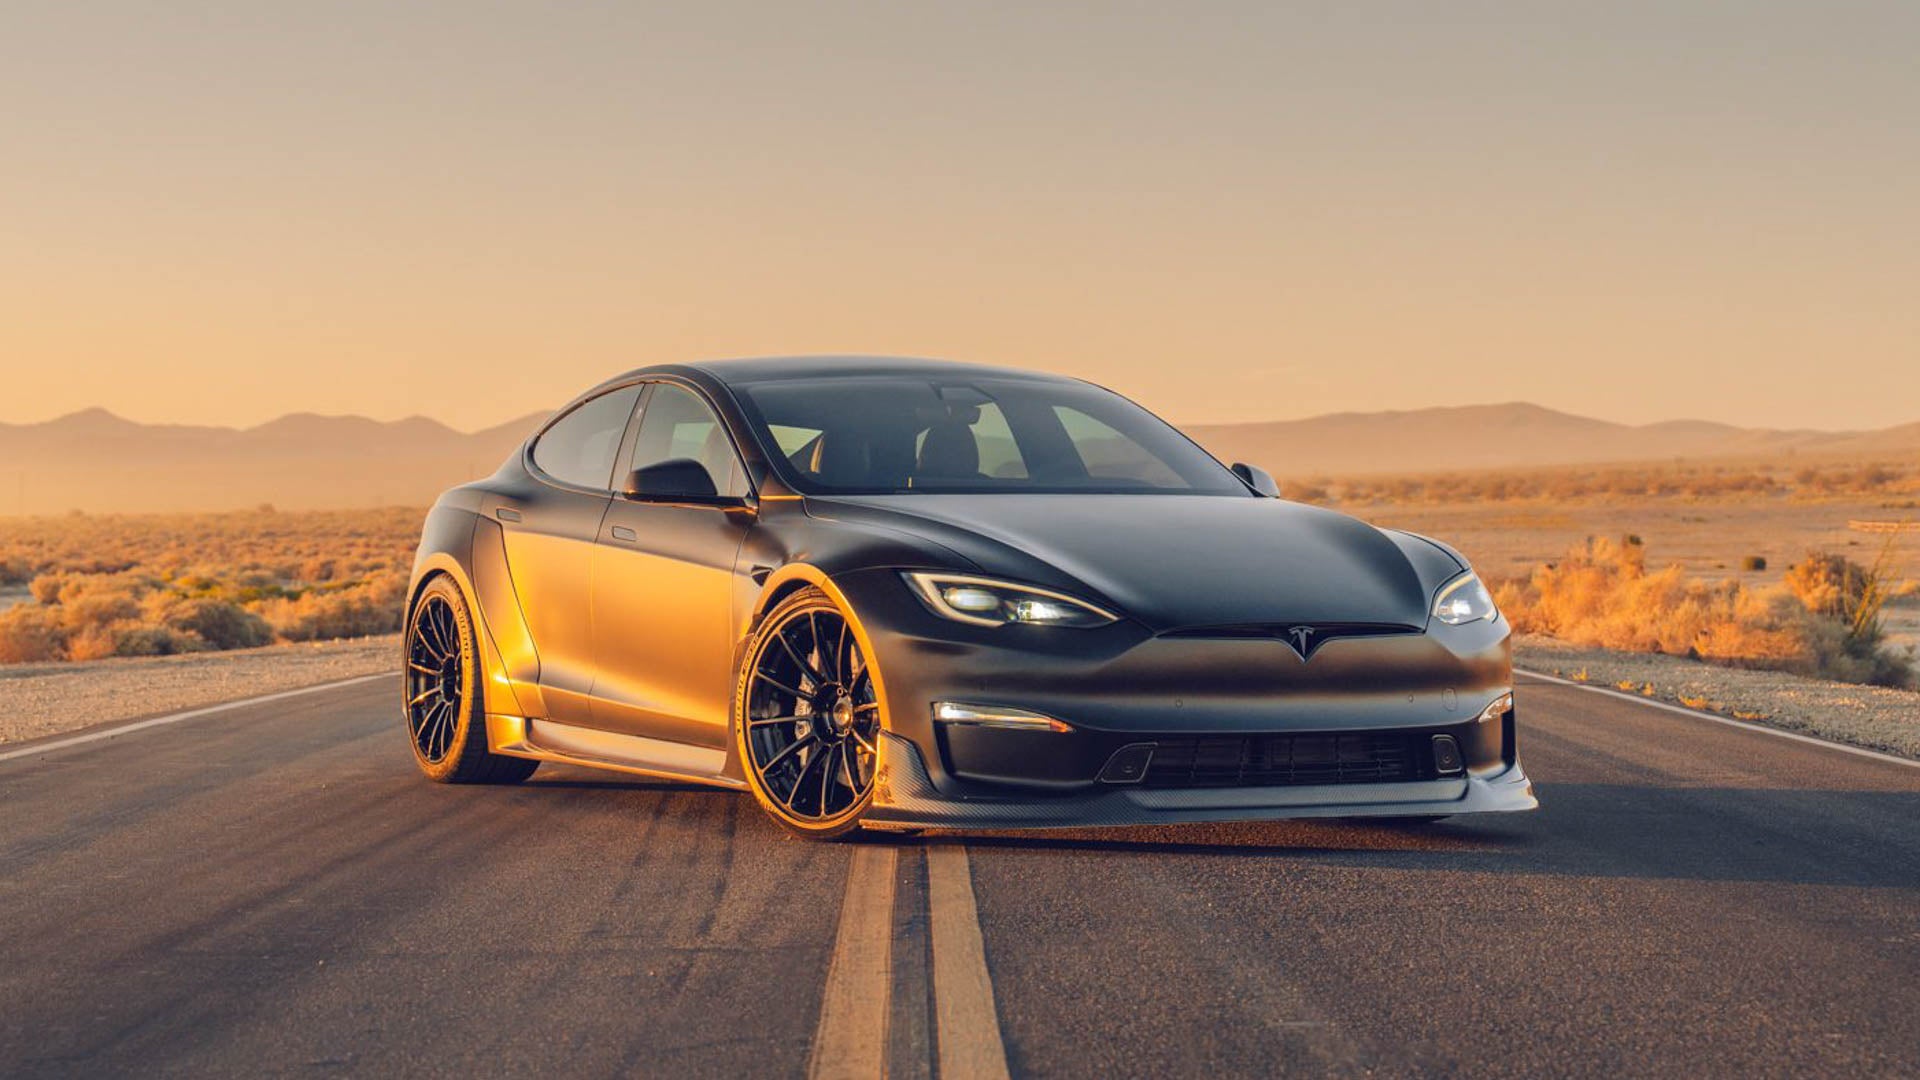 This Dark Knight Body Kit Adds Some Aggression to the Tesla Model S